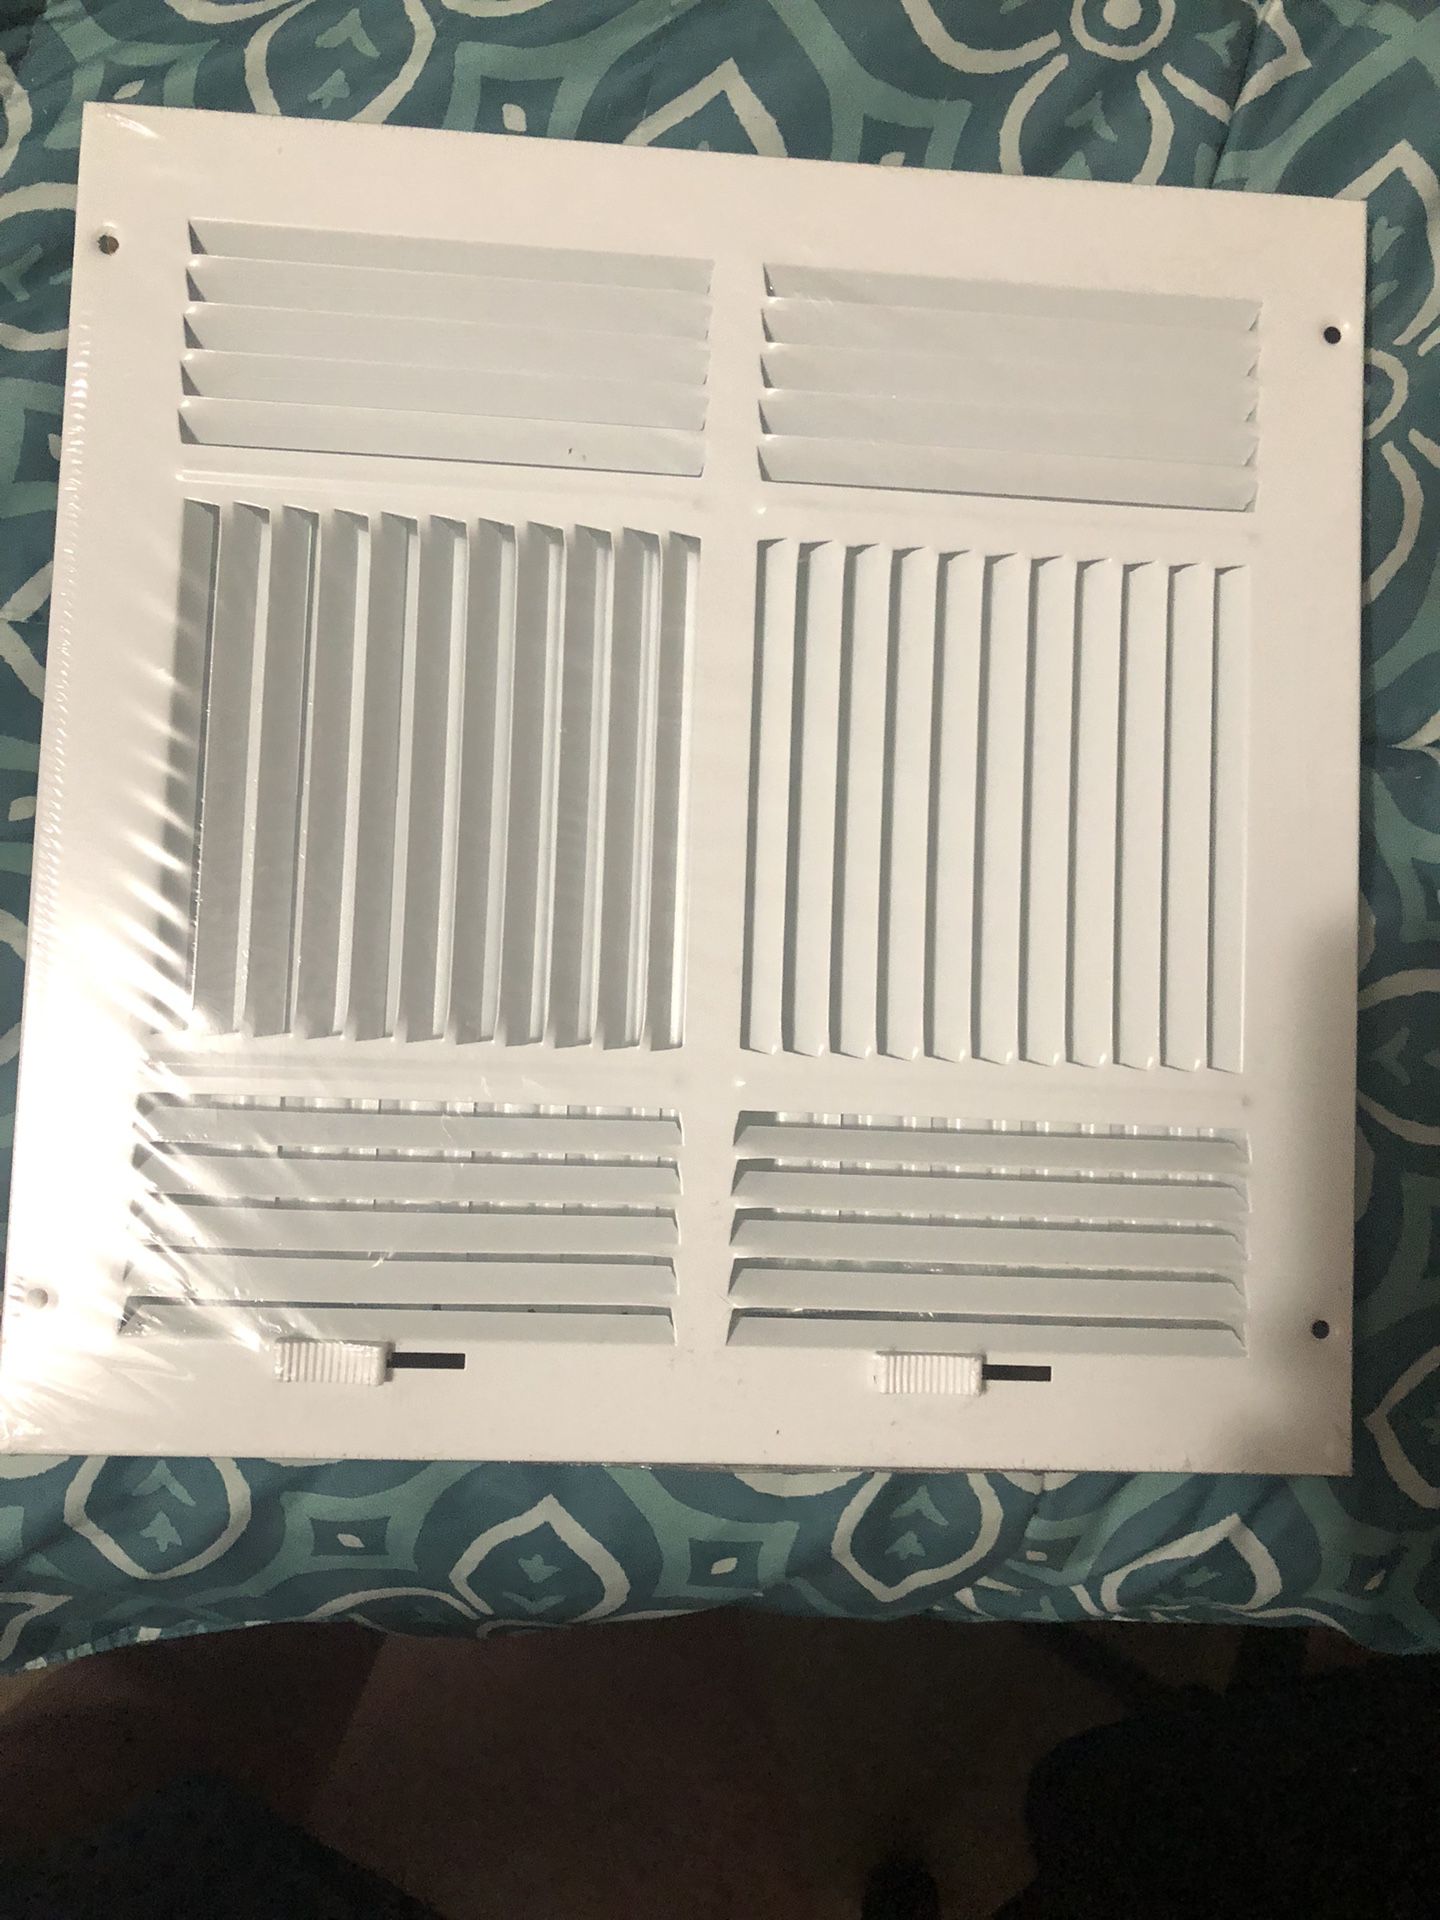 Ceiling vent sidewall register 12 x 12 box of eight